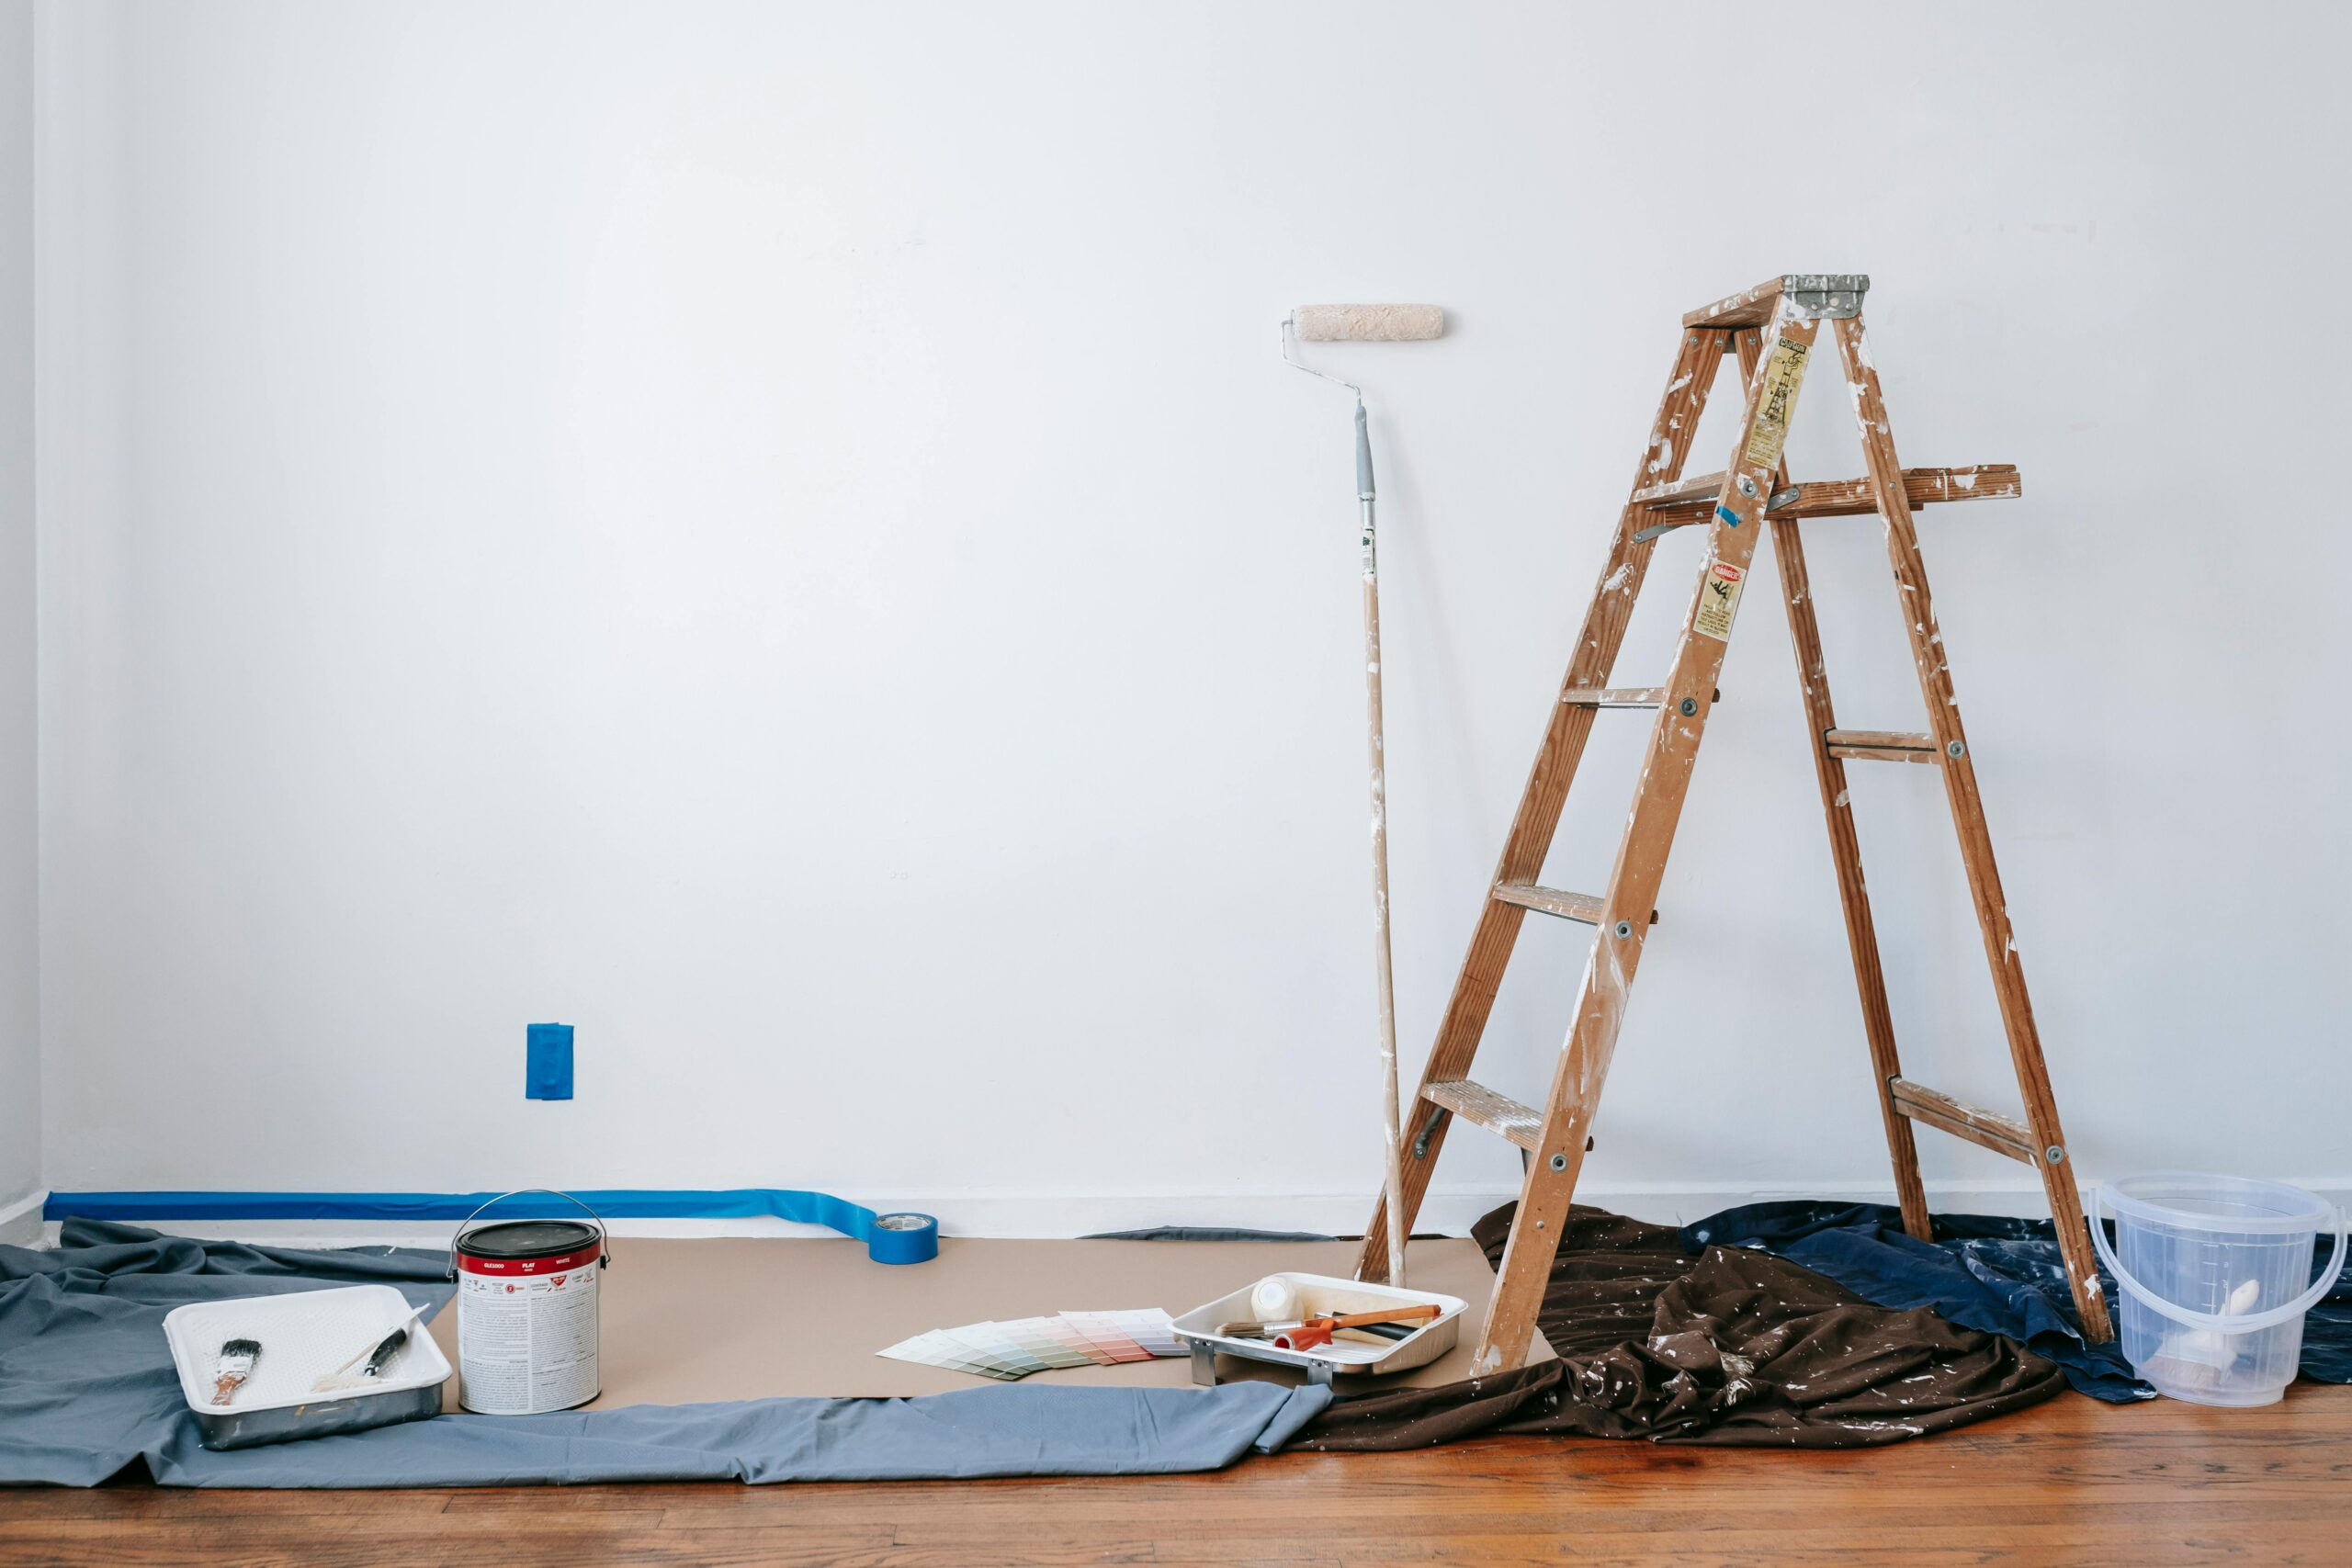 Where Should I Start With a Home Renovation?